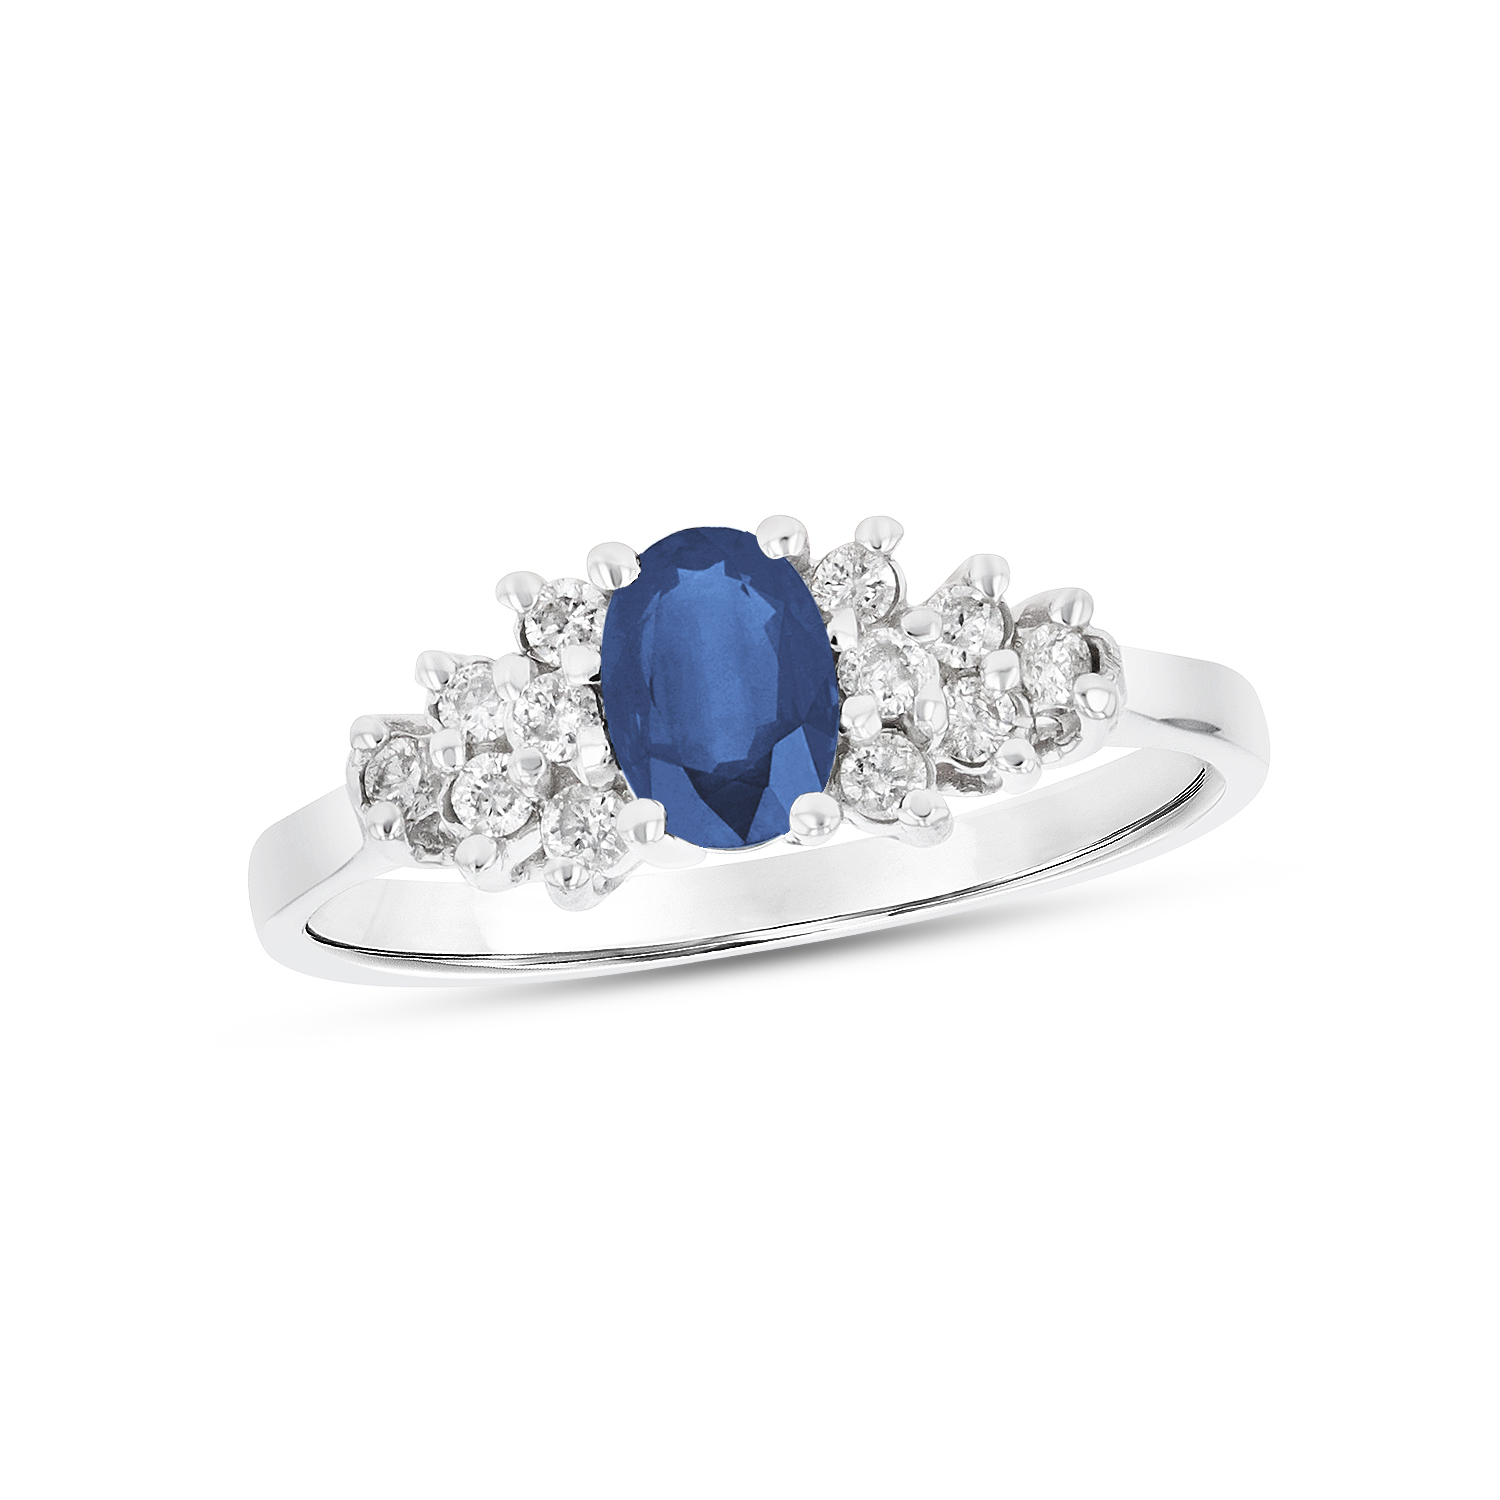 View 0.68ctw Diamond and Sapphire Ring in 14k White Gold